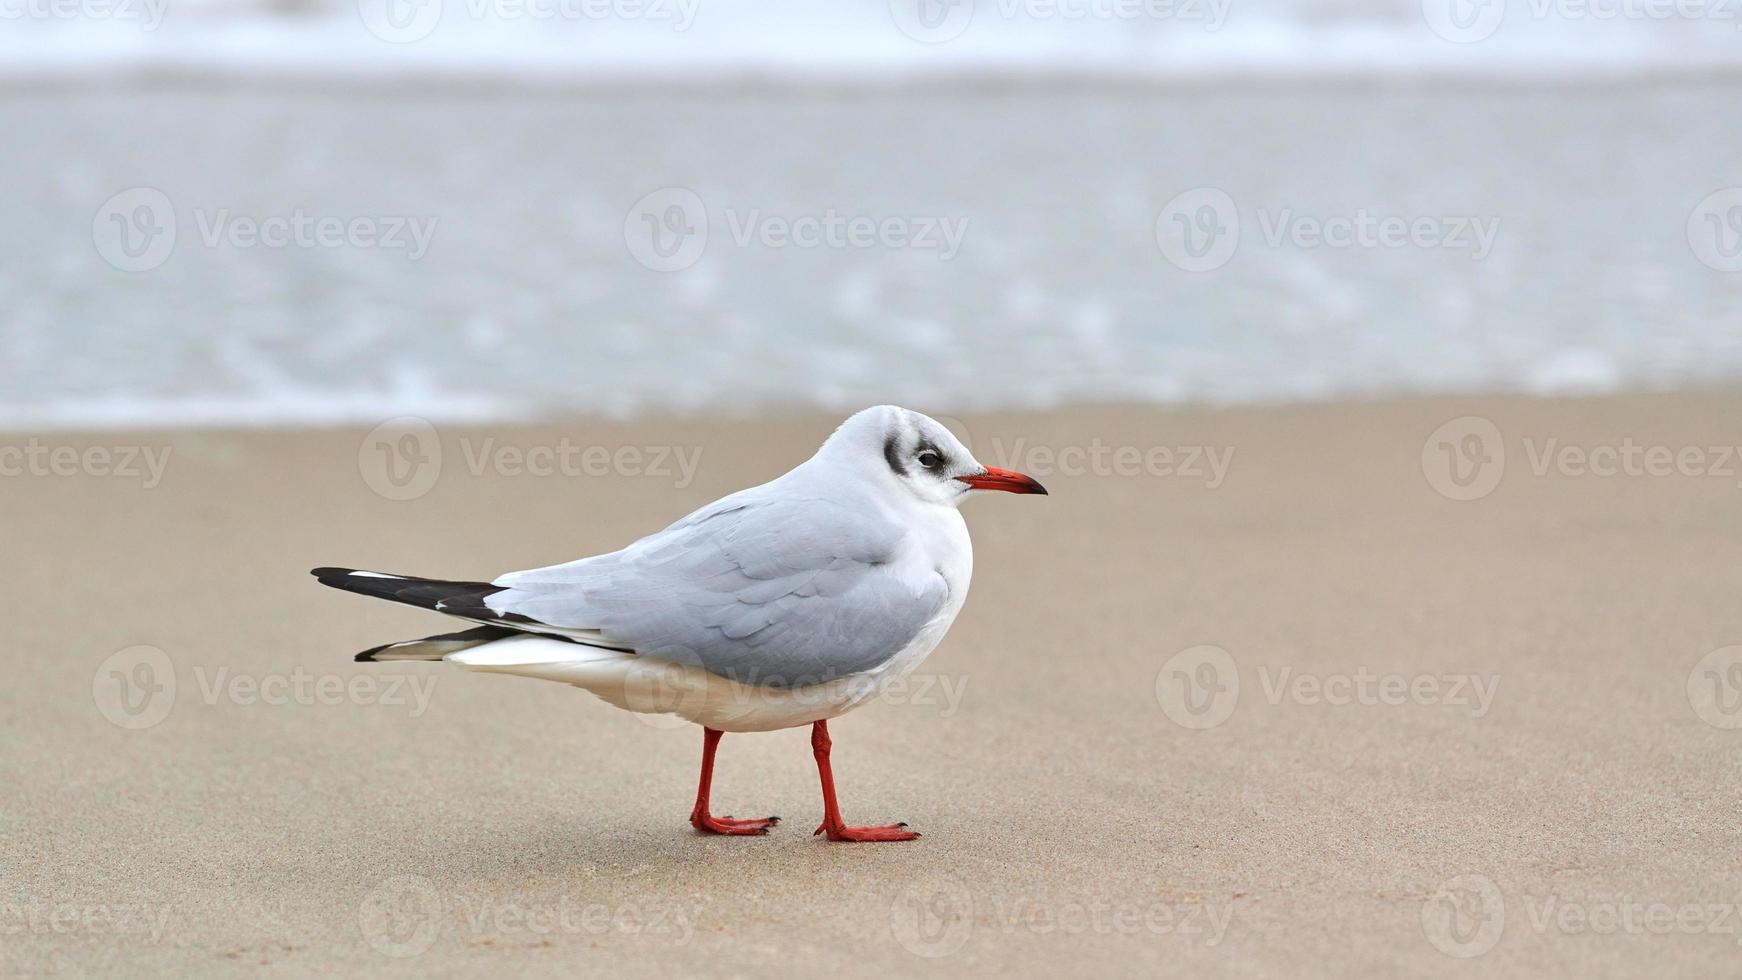 Black-headed seagull at beach, sea and sand background photo